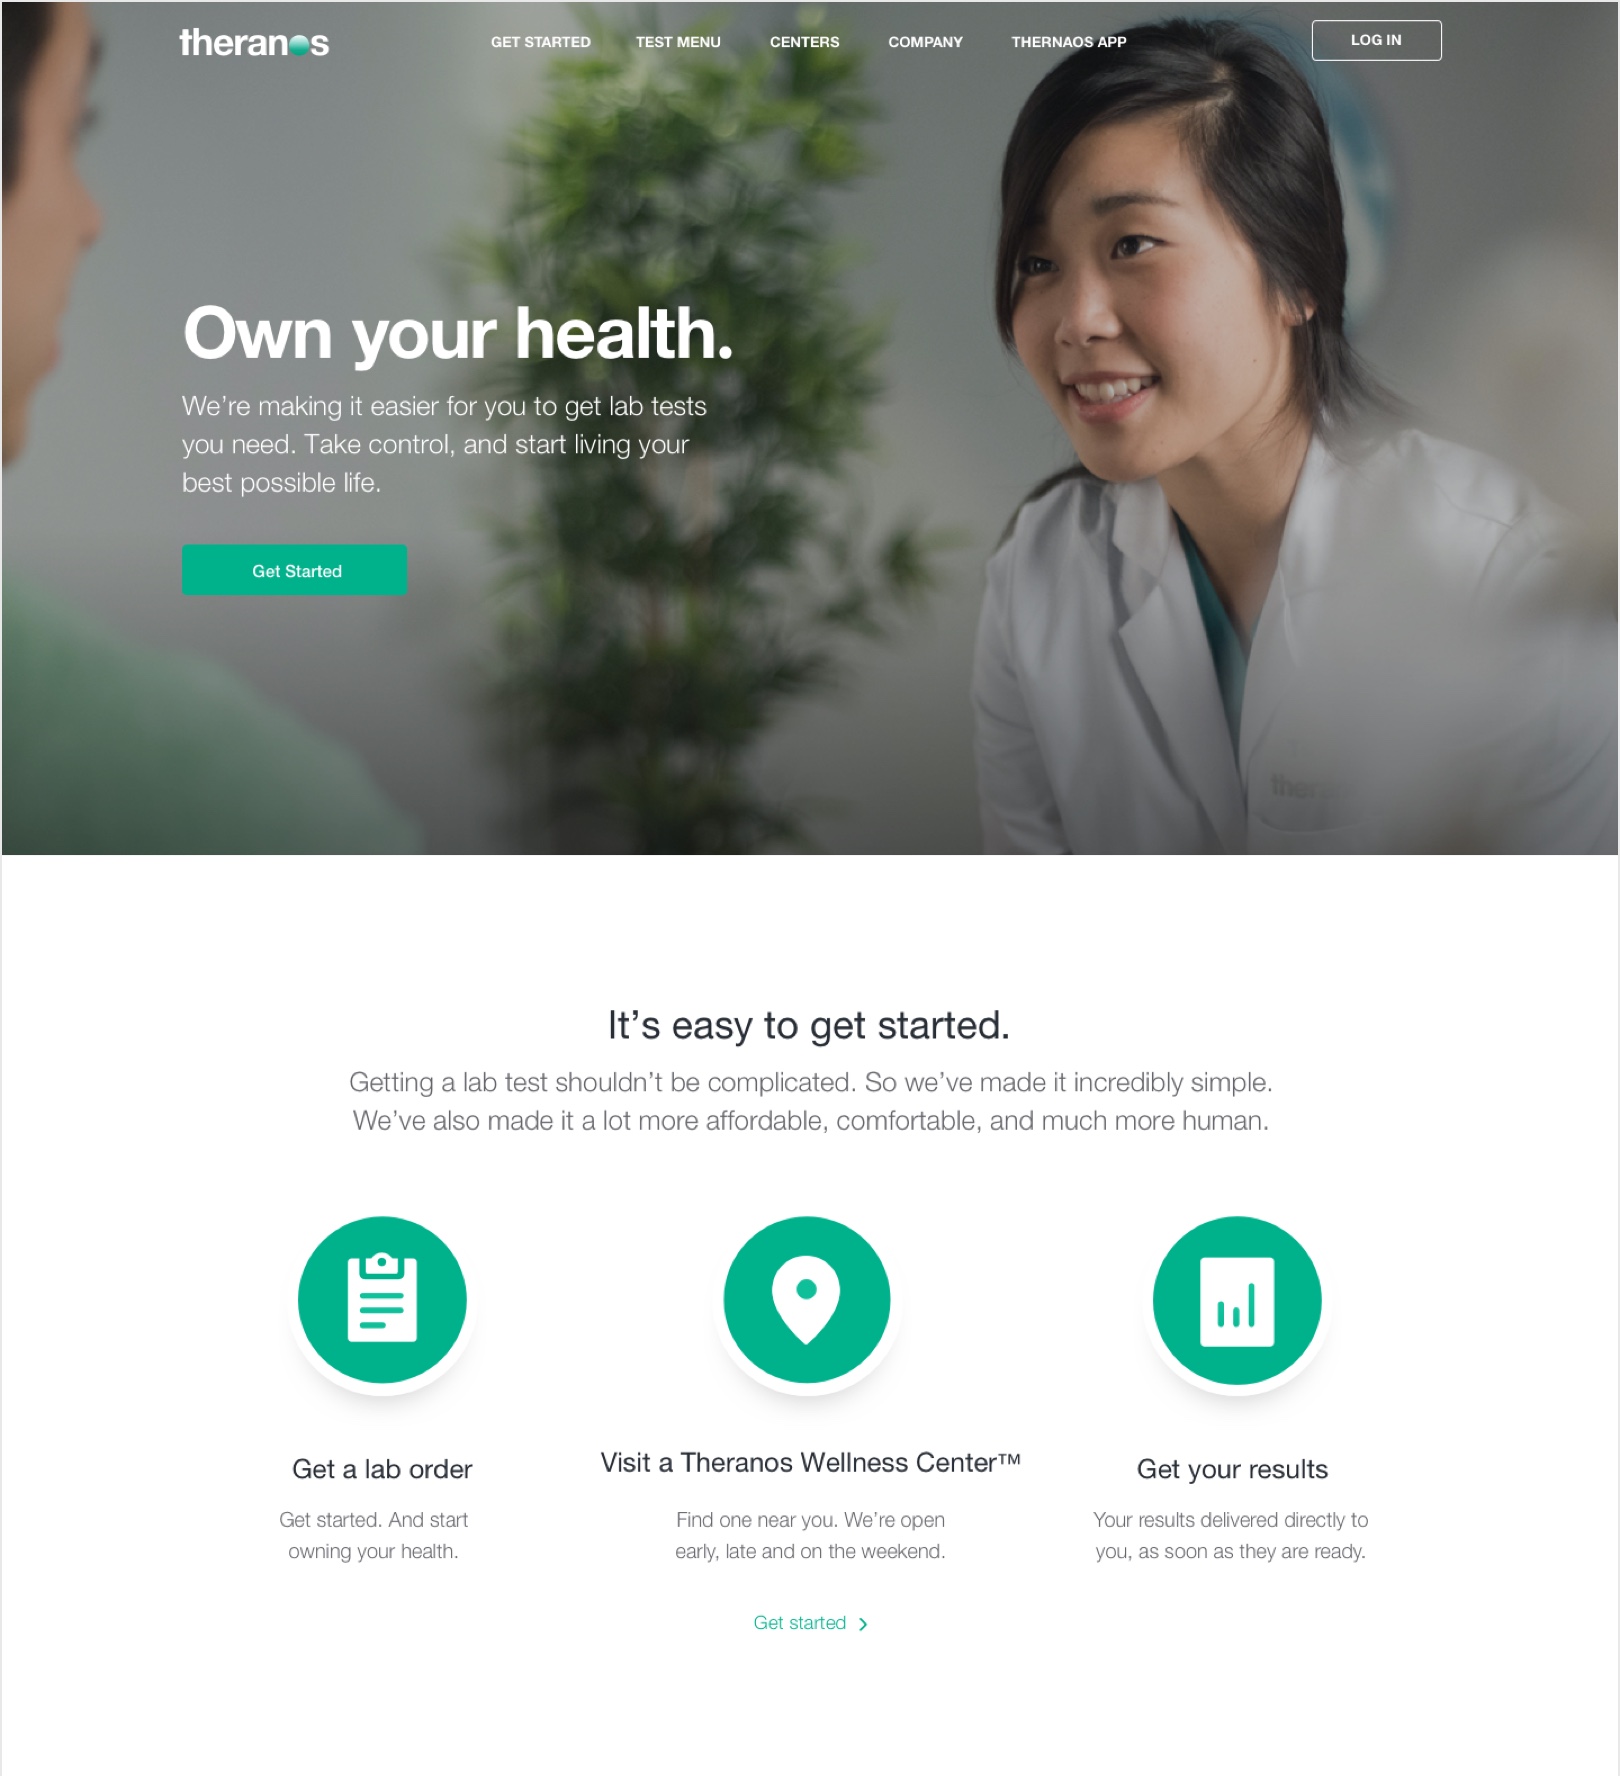 Theranos | Branding, Website Design, Web and Mobile Apps | Baseline.